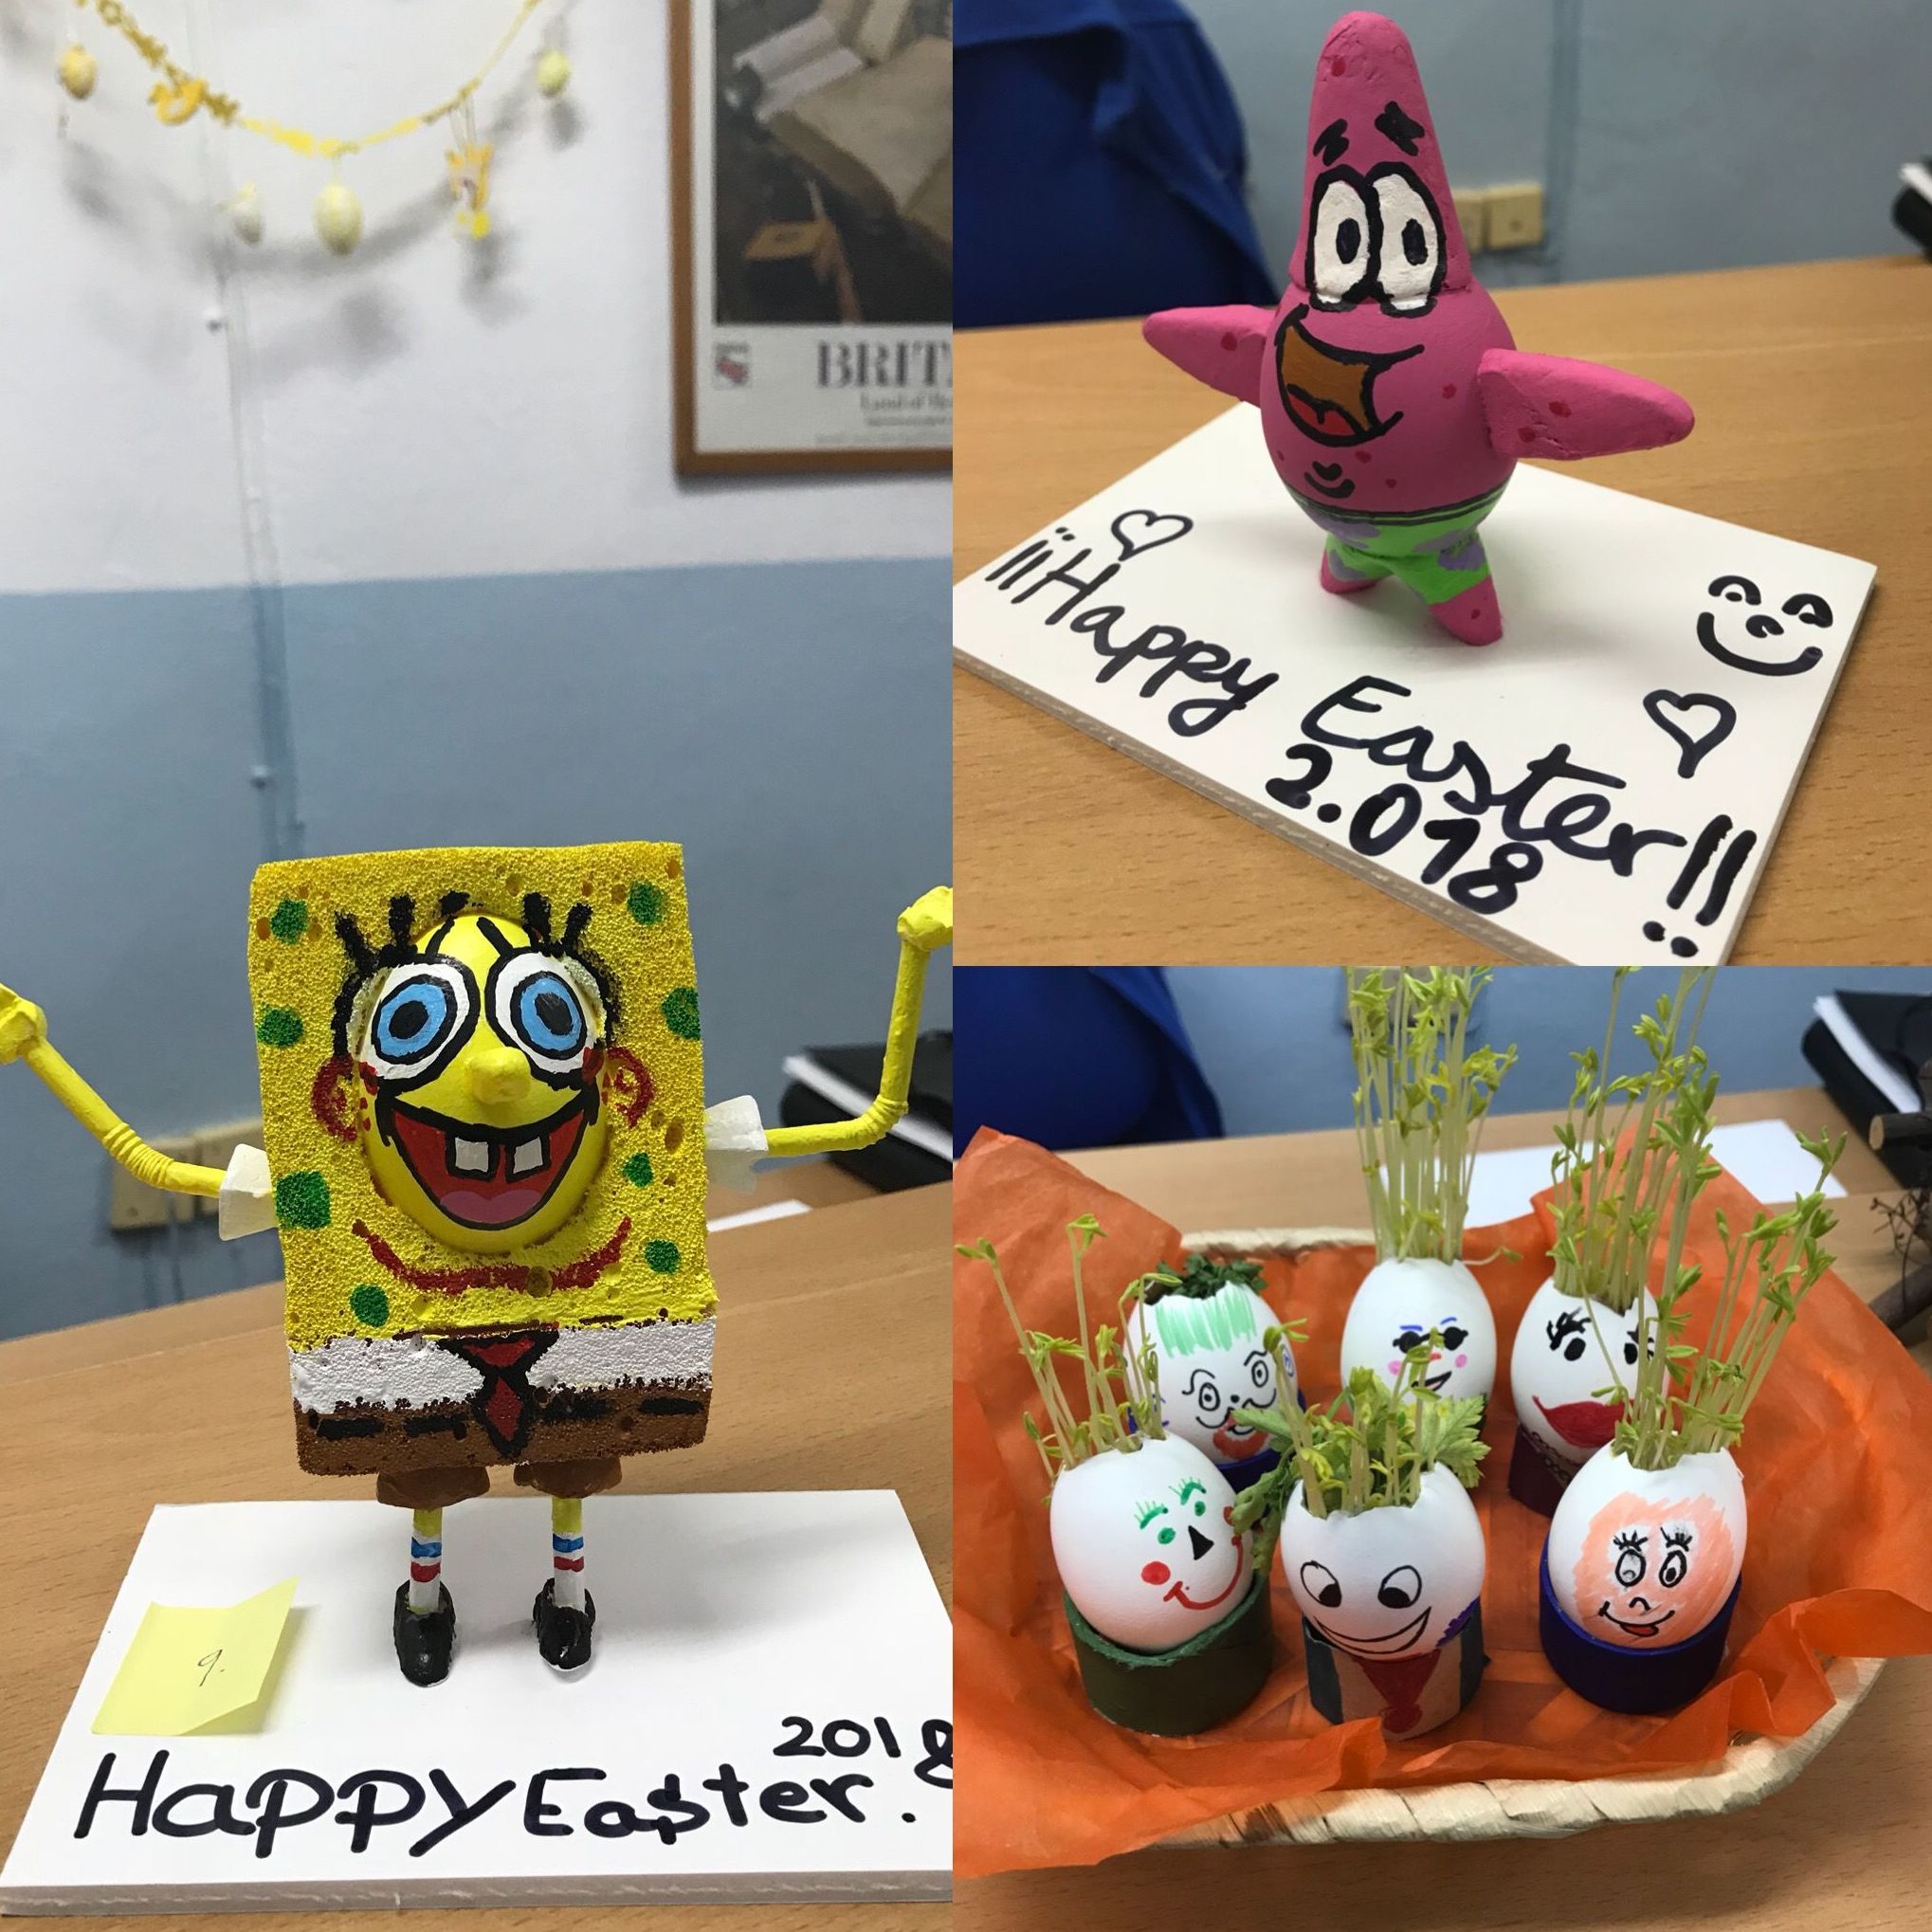 Winners 2018 Easter egg competition